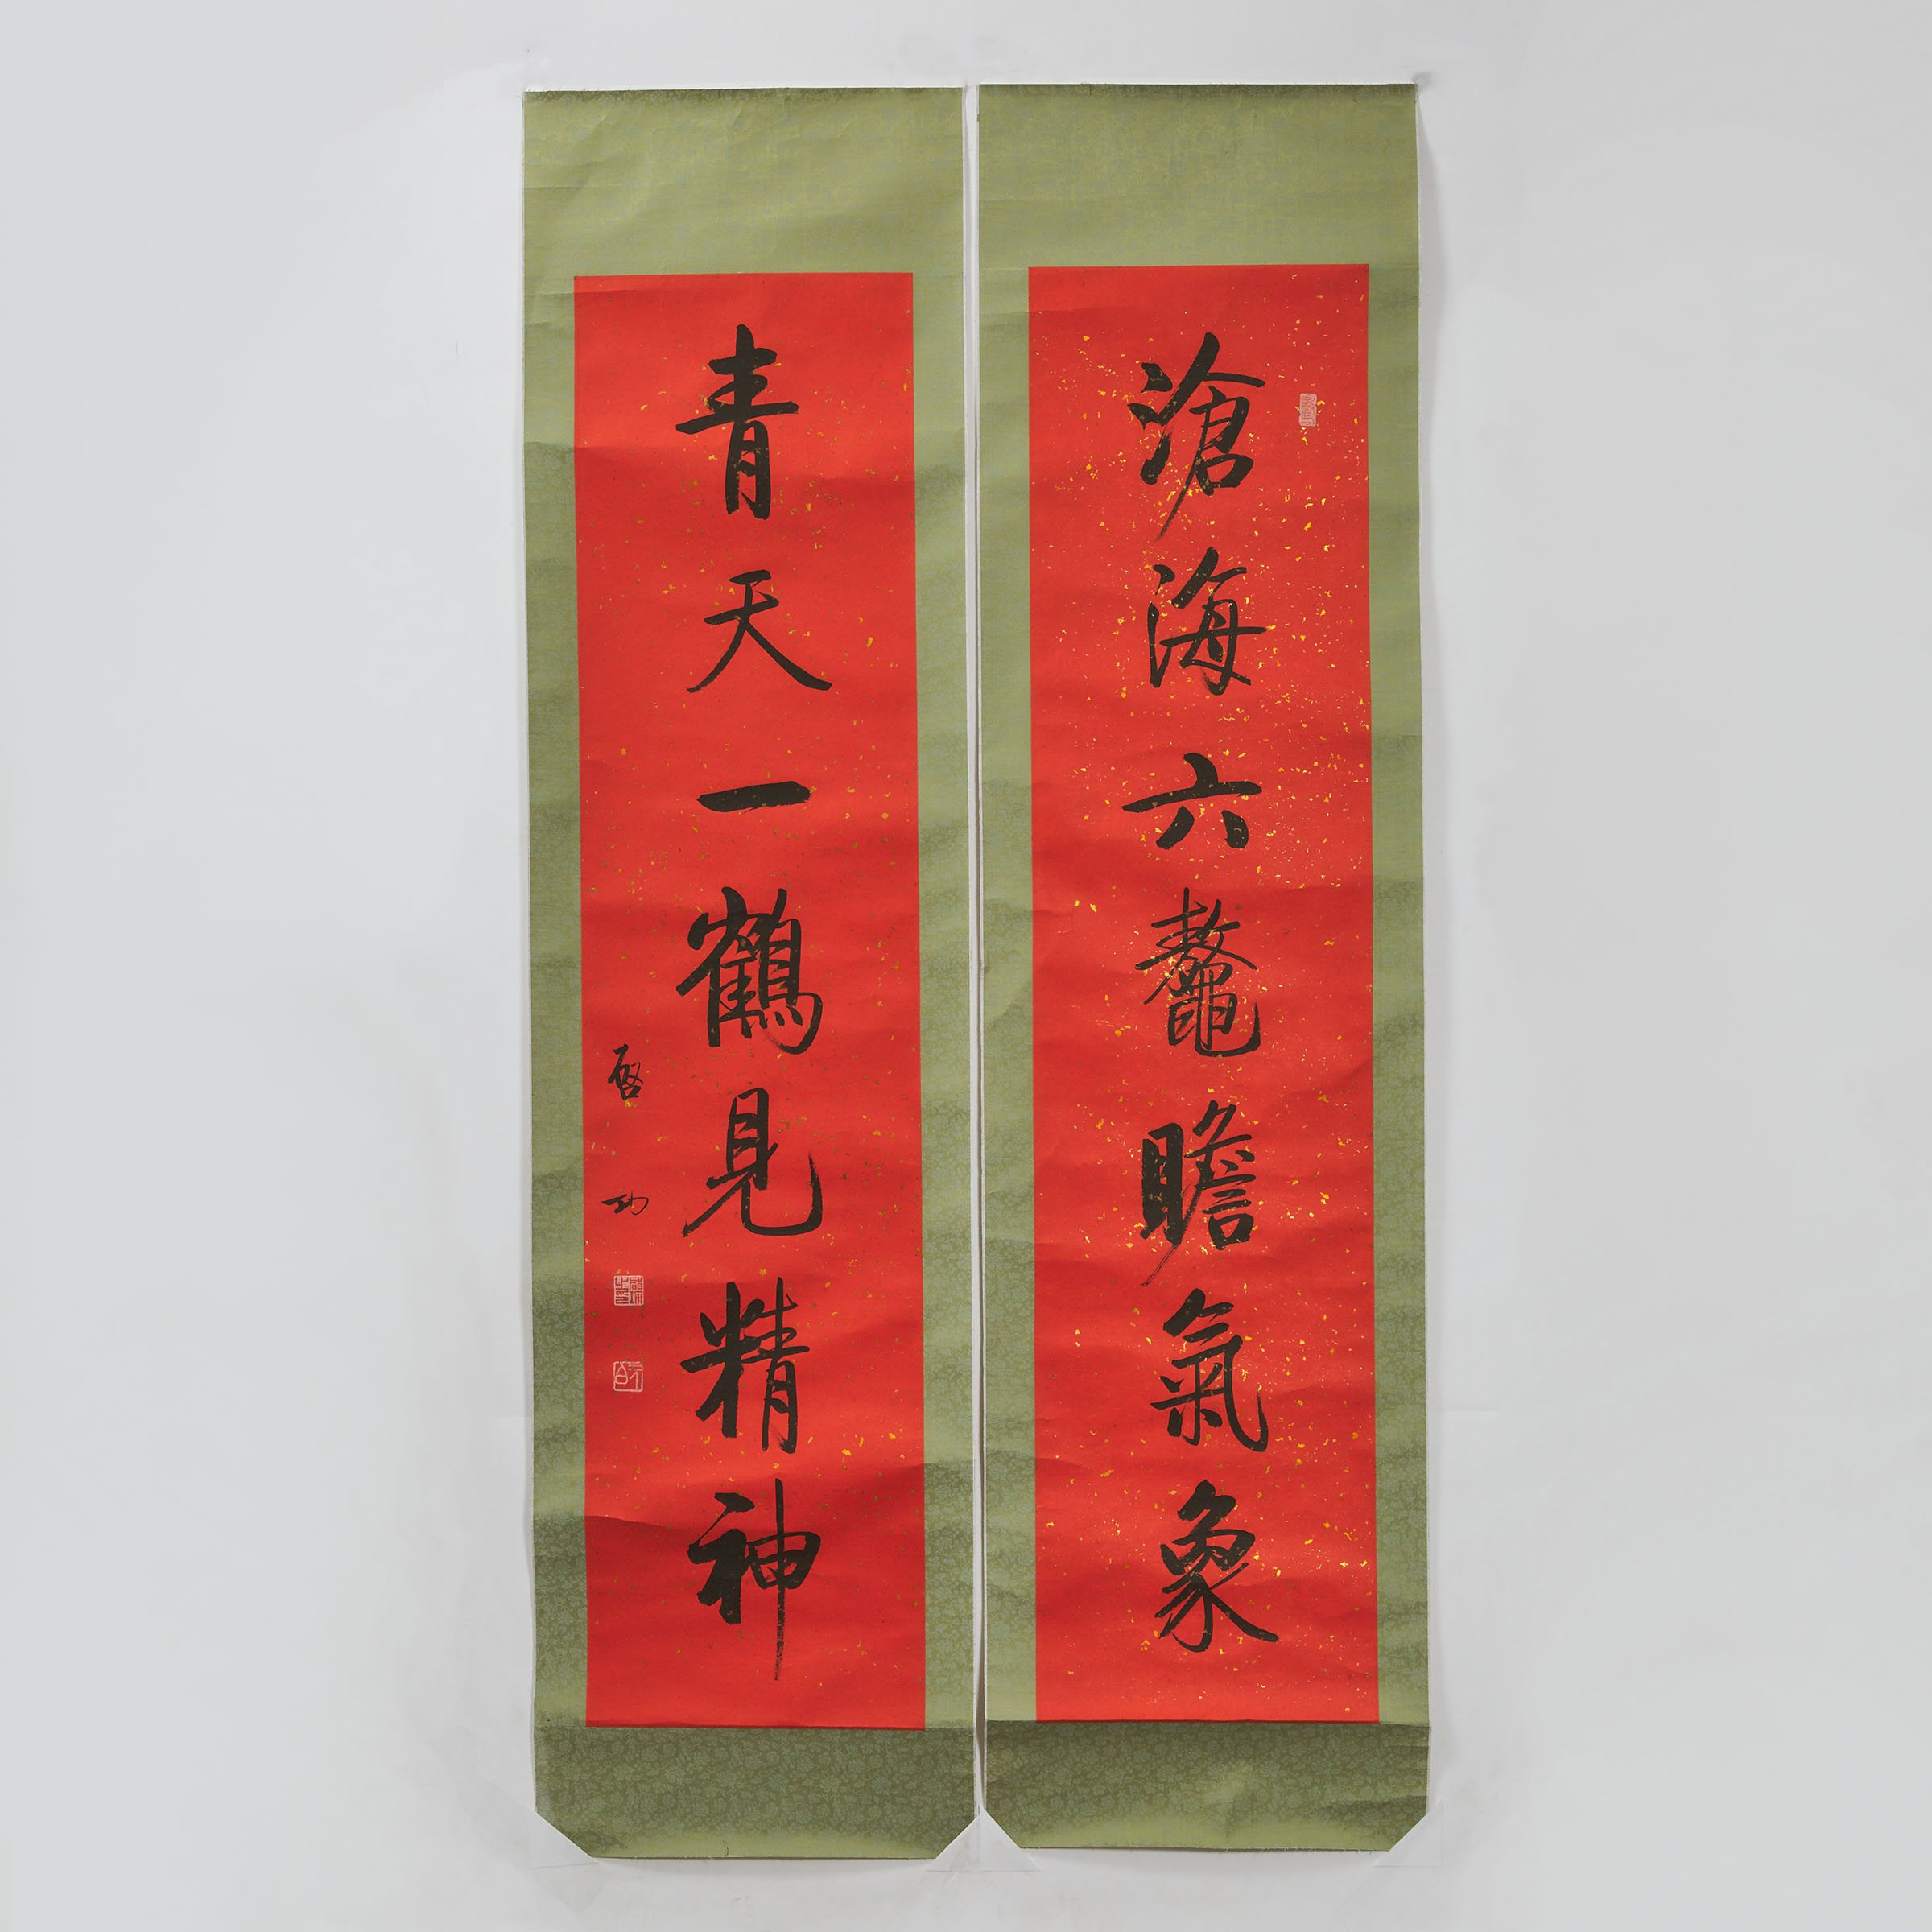 Attributed to Qi Gong (1912-2005), Couplet